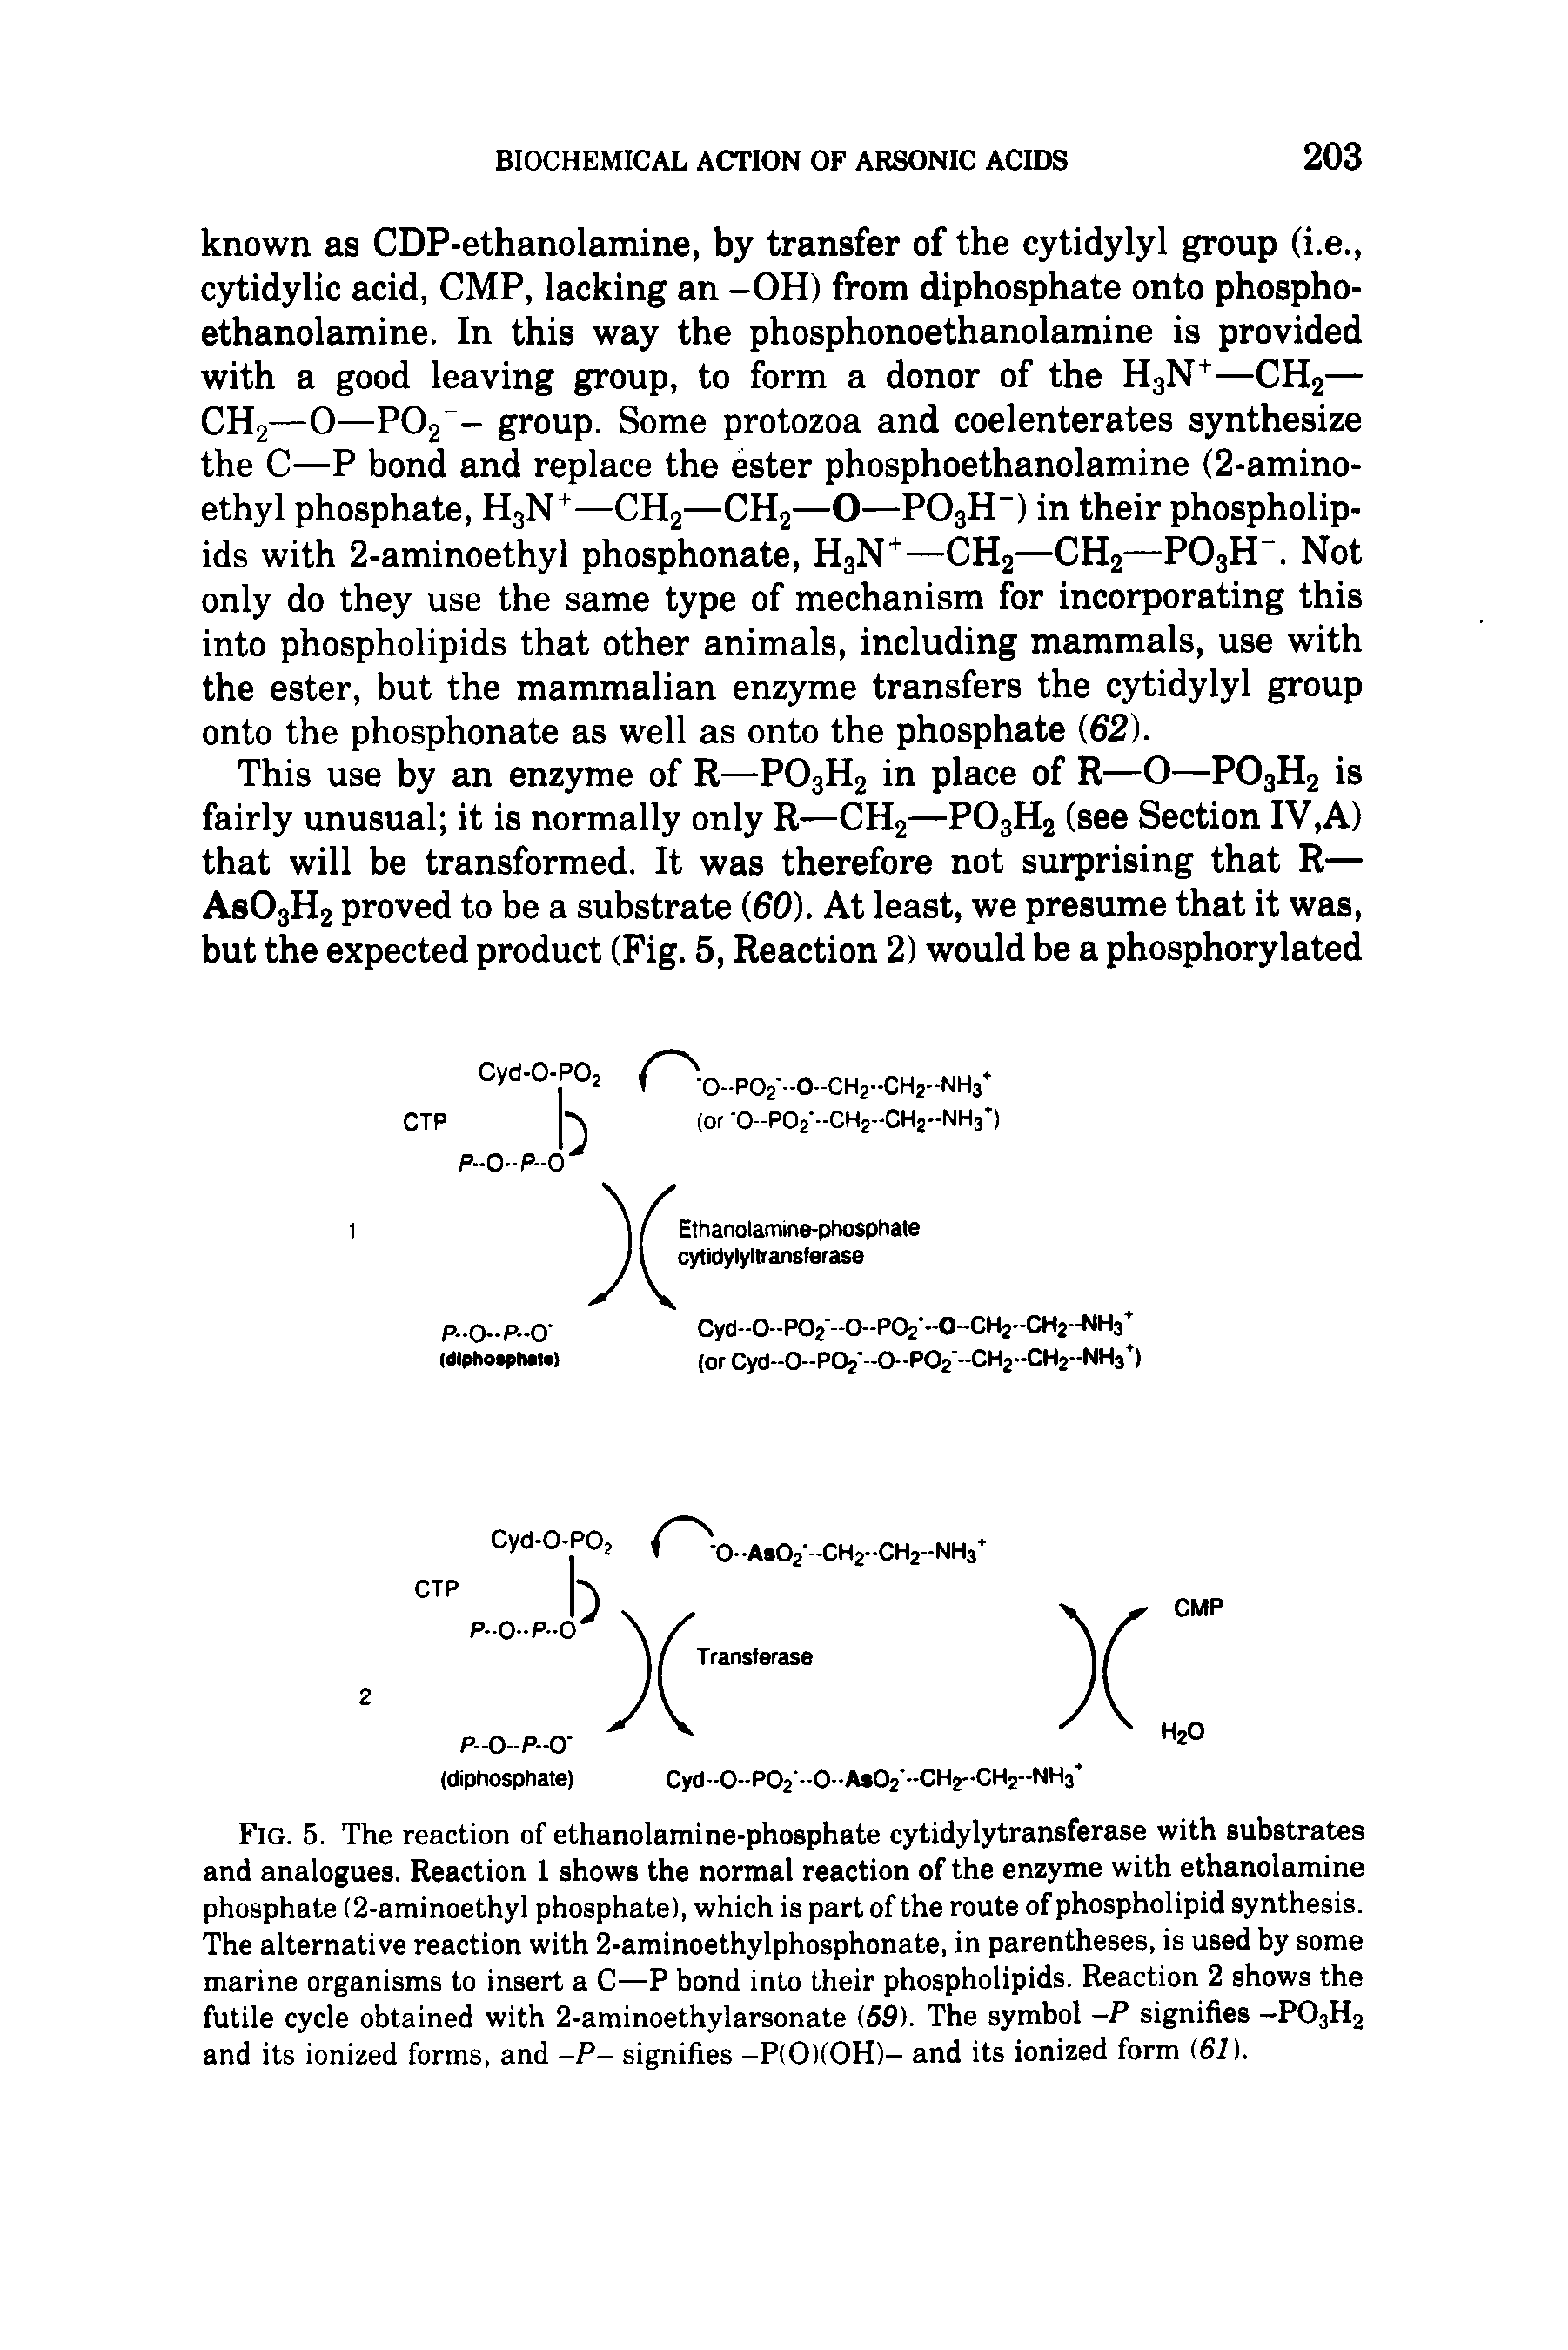 Fig. 5. The reaction of ethanolamine-phosphate cytidylytransferase with substrates and analogues. Reaction 1 shows the normal reaction of the enzyme with ethanolamine phosphate (2-aminoethyl phosphate), which is part of the route of phospholipid synthesis. The alternative reaction with 2-aminoethylphosphonate, in parentheses, is used by some marine organisms to insert a C—P bond into their phospholipids. Reaction 2 shows the futile cycle obtained with 2-aminoethylarsonate (59). The symbol -P signifies -P03H2 and its ionized forms, and -P- signifies -P(0)(0H)- and its ionized form (61).